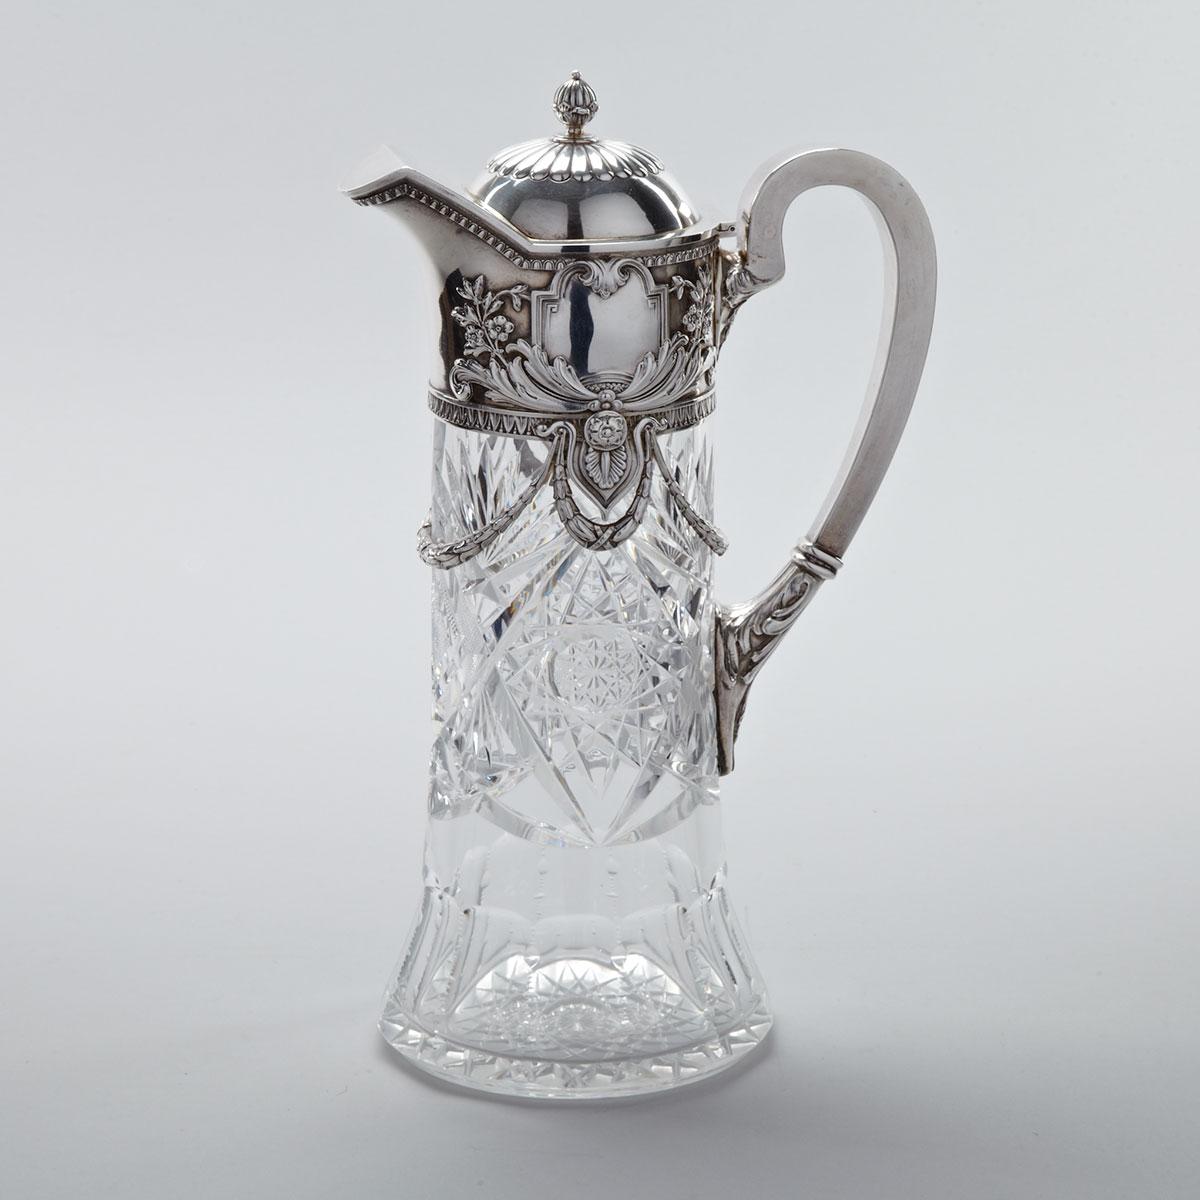 Russian Silver Mounted Cut Glass Wine Jug, 4th Artel, Moscow, 1908-17